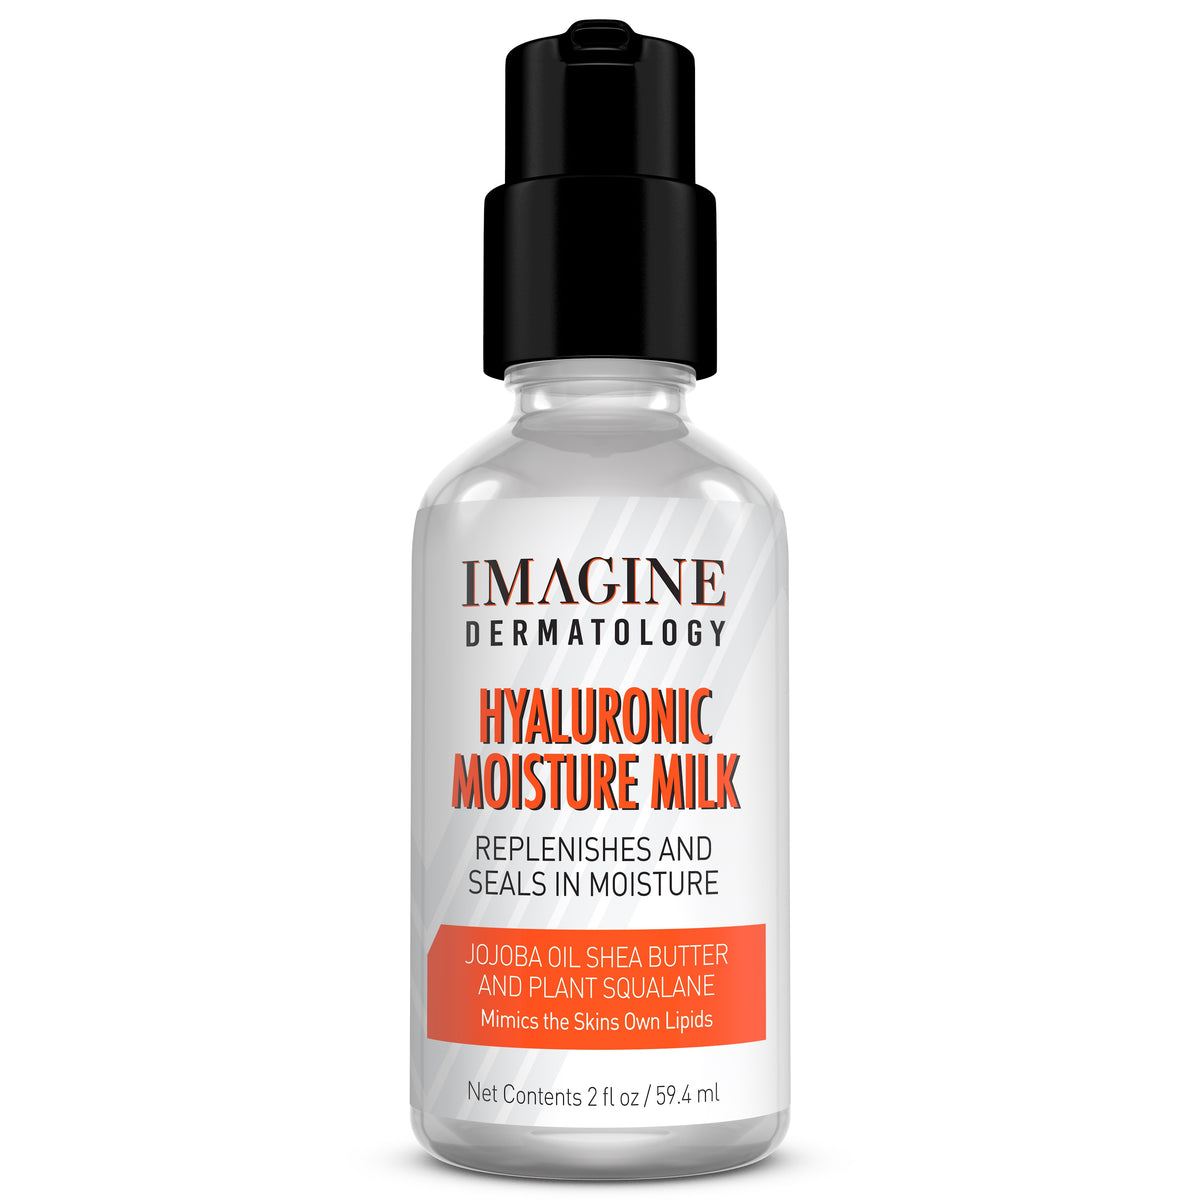 Hyaluronic Moisture Milk Jojoba Squalane Hyaluronic Acid and Other Powerful Ingredients Hydrate AND Lock in Moisture 2 fl oz/59.4 ml (2 fl oz)